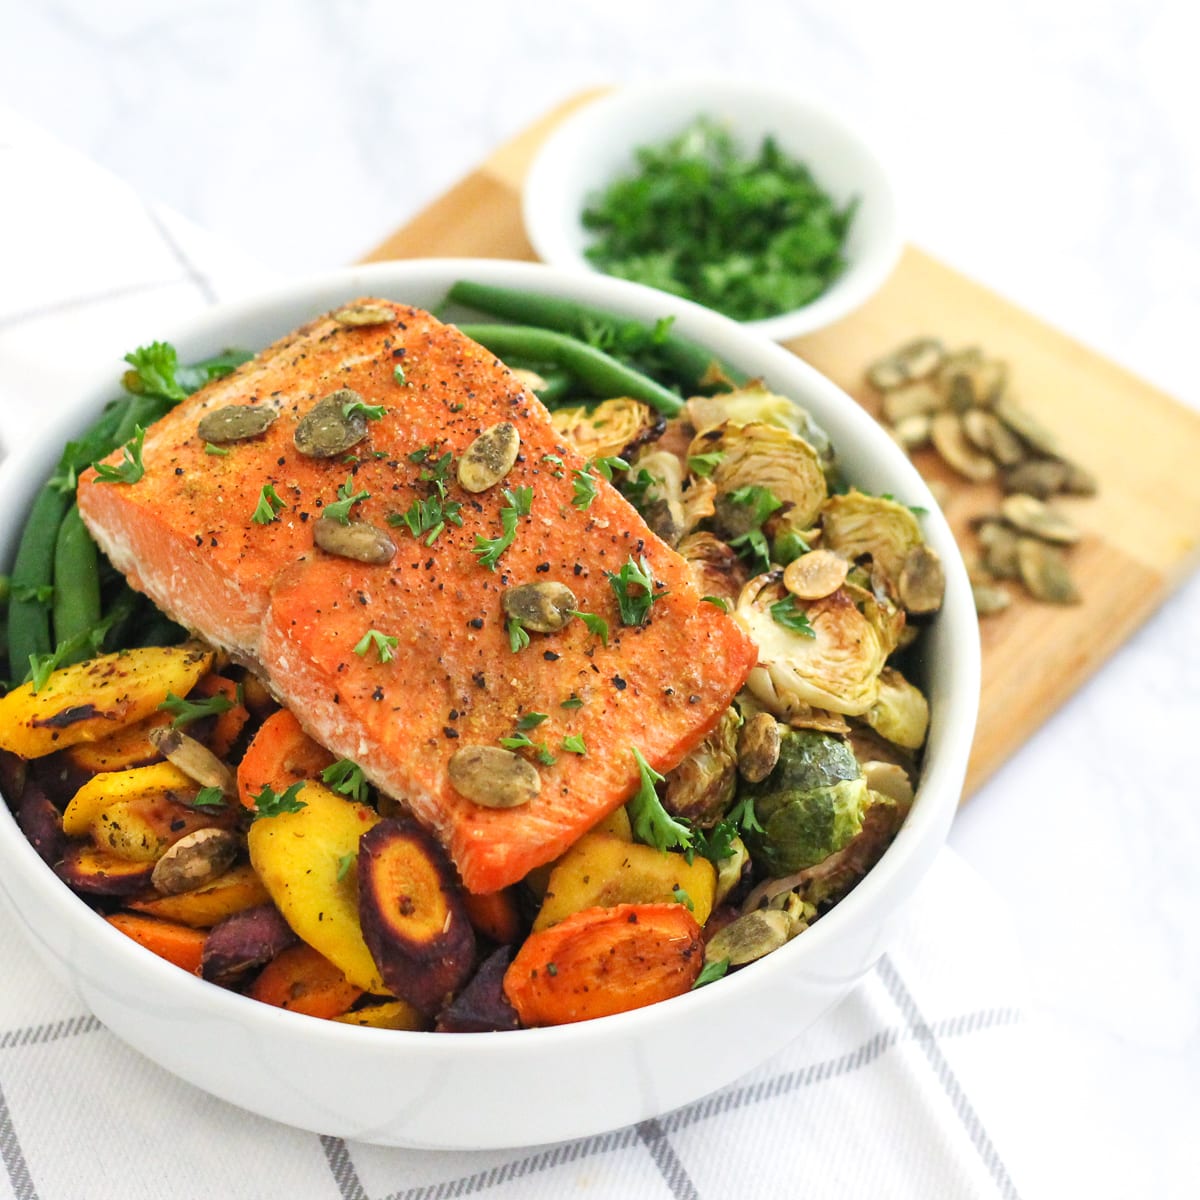 Sheet Pan Salmon and Herb Roasted Vegetables | Paleo, pescetarian and Whole30 friendly, this high-protein, easy dinner is one you'll want on standby | My Fresh Perspective | #pescetarian #paleo #whole30 #whole30recipes #antiinflammatory